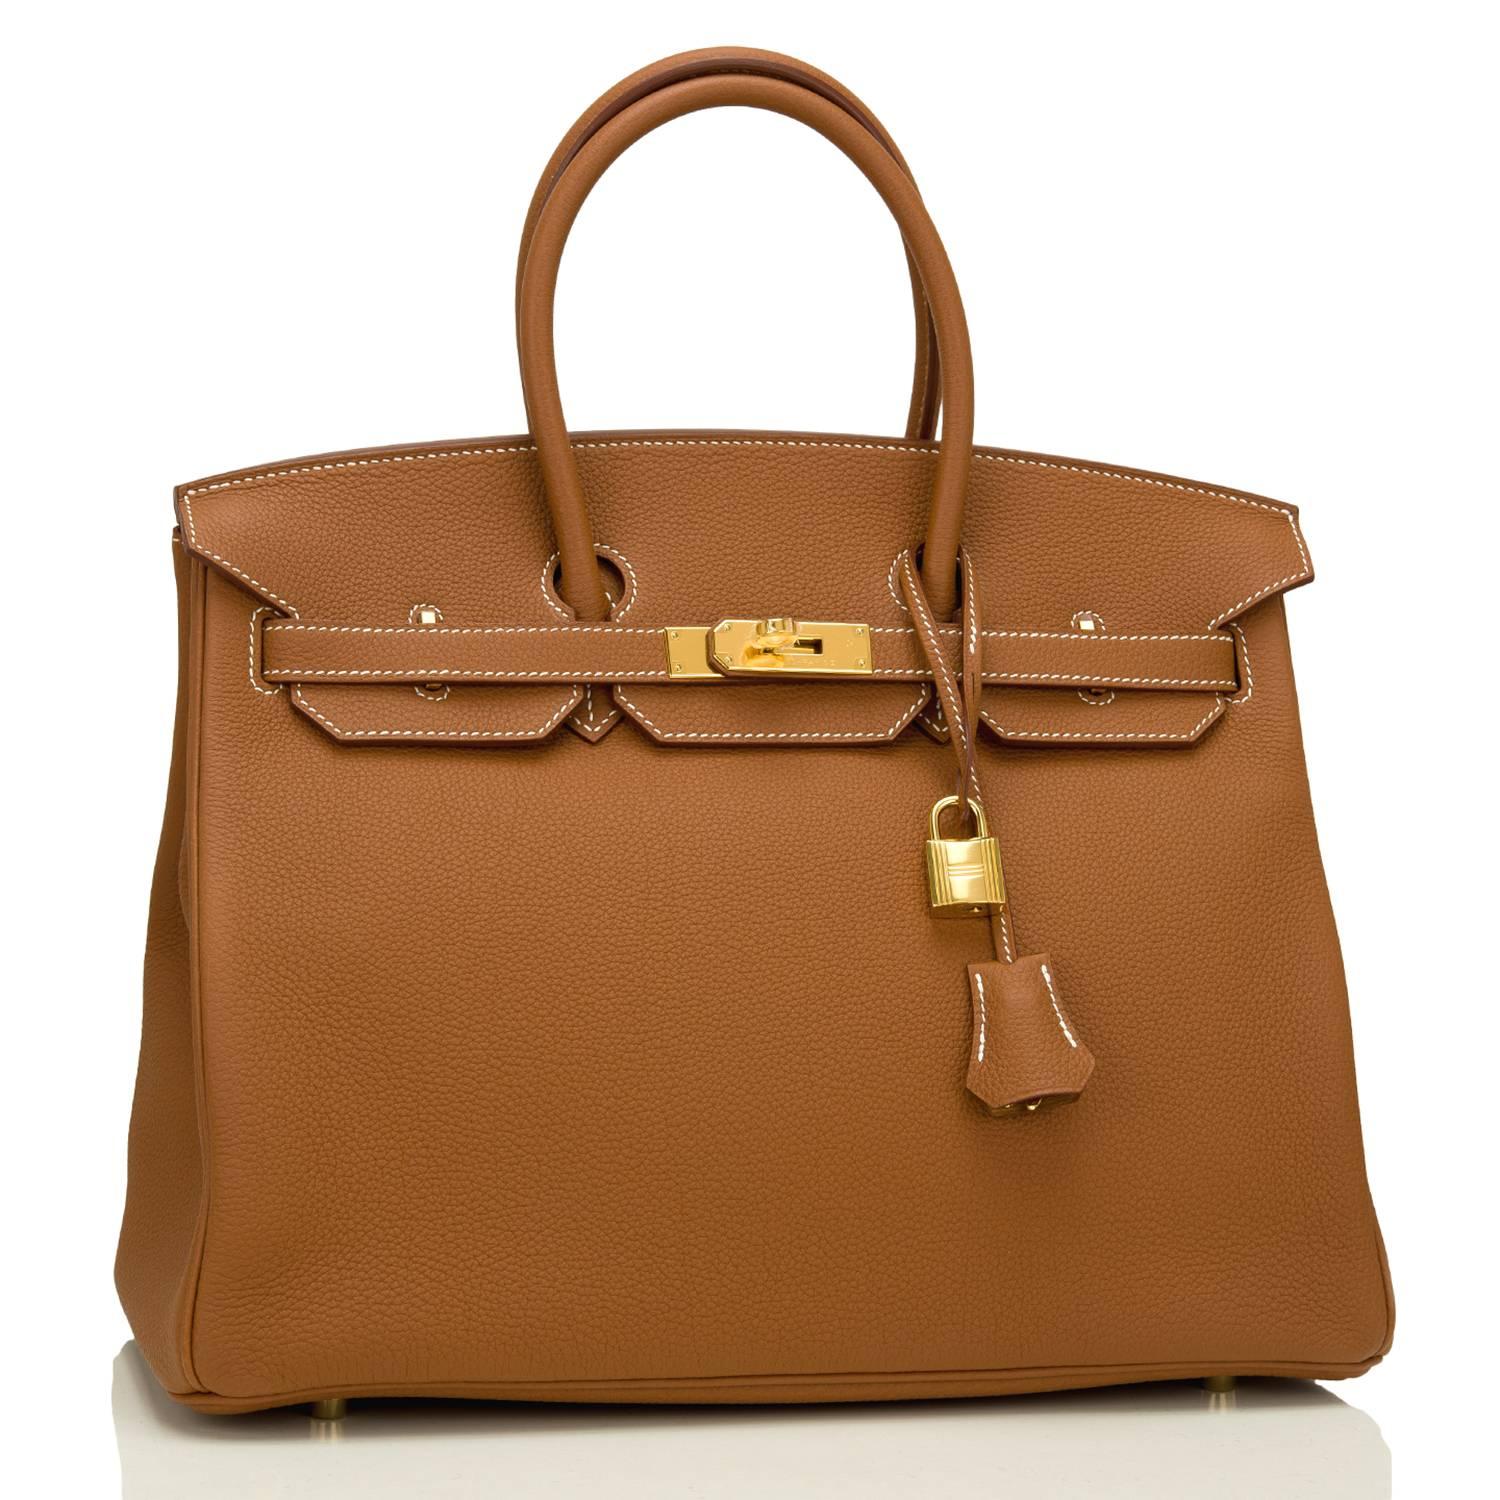 Hermes Gold Birkin 35cm in togo leather with gold hardware. 

This Birkin features white contrast stitching, a front toggle closure, a clochette with lock and two keys, and double rolled handles.

The interior is lined with Gold chevre and has